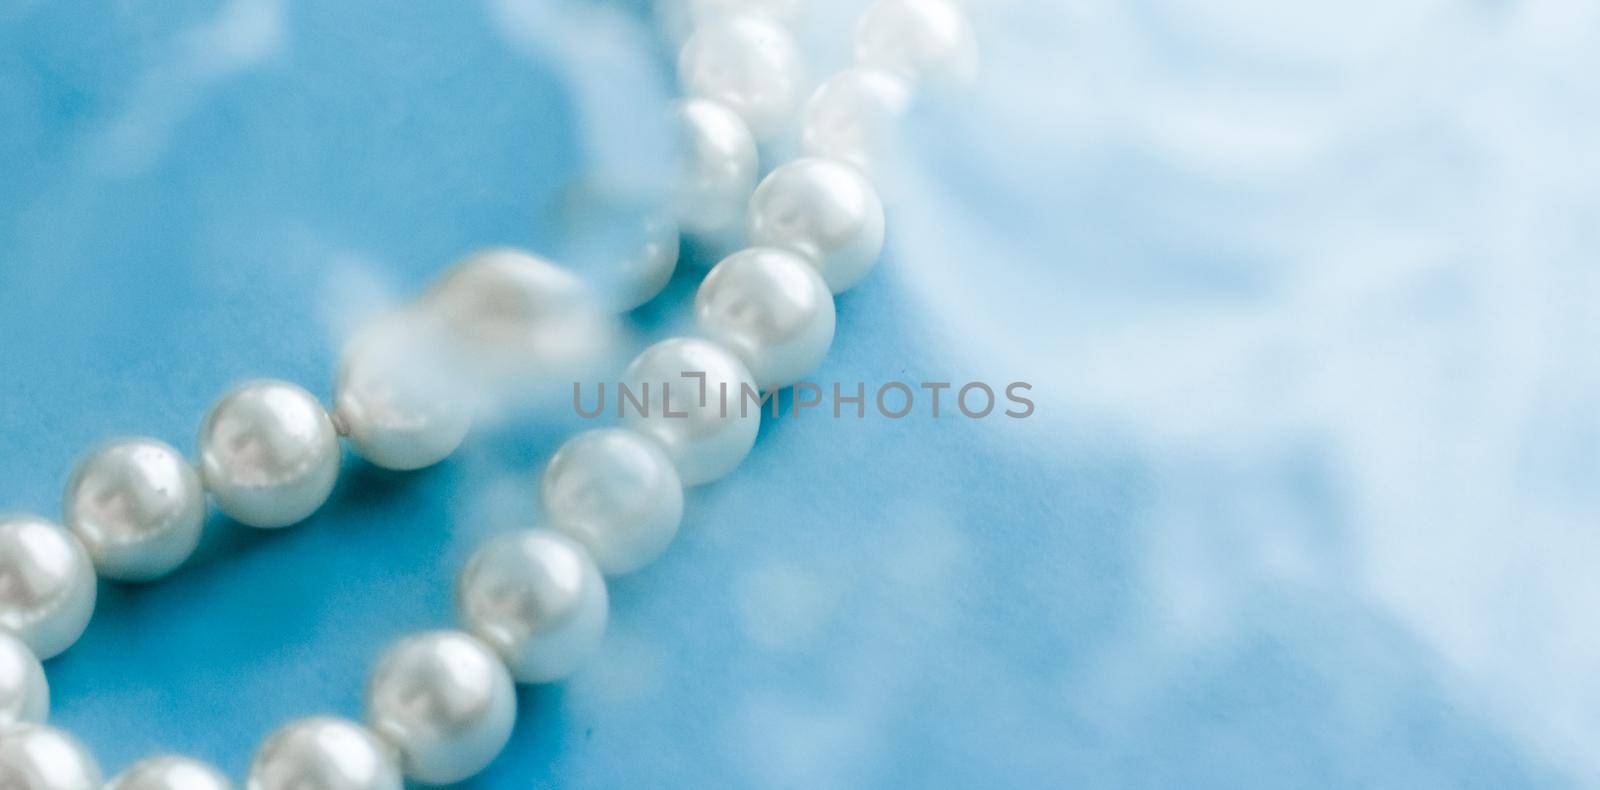 Coastal jewellery fashion, pearl necklace under blue water background, glamour style present and chic gift for luxury jewelery brand, holiday banner design by Anneleven